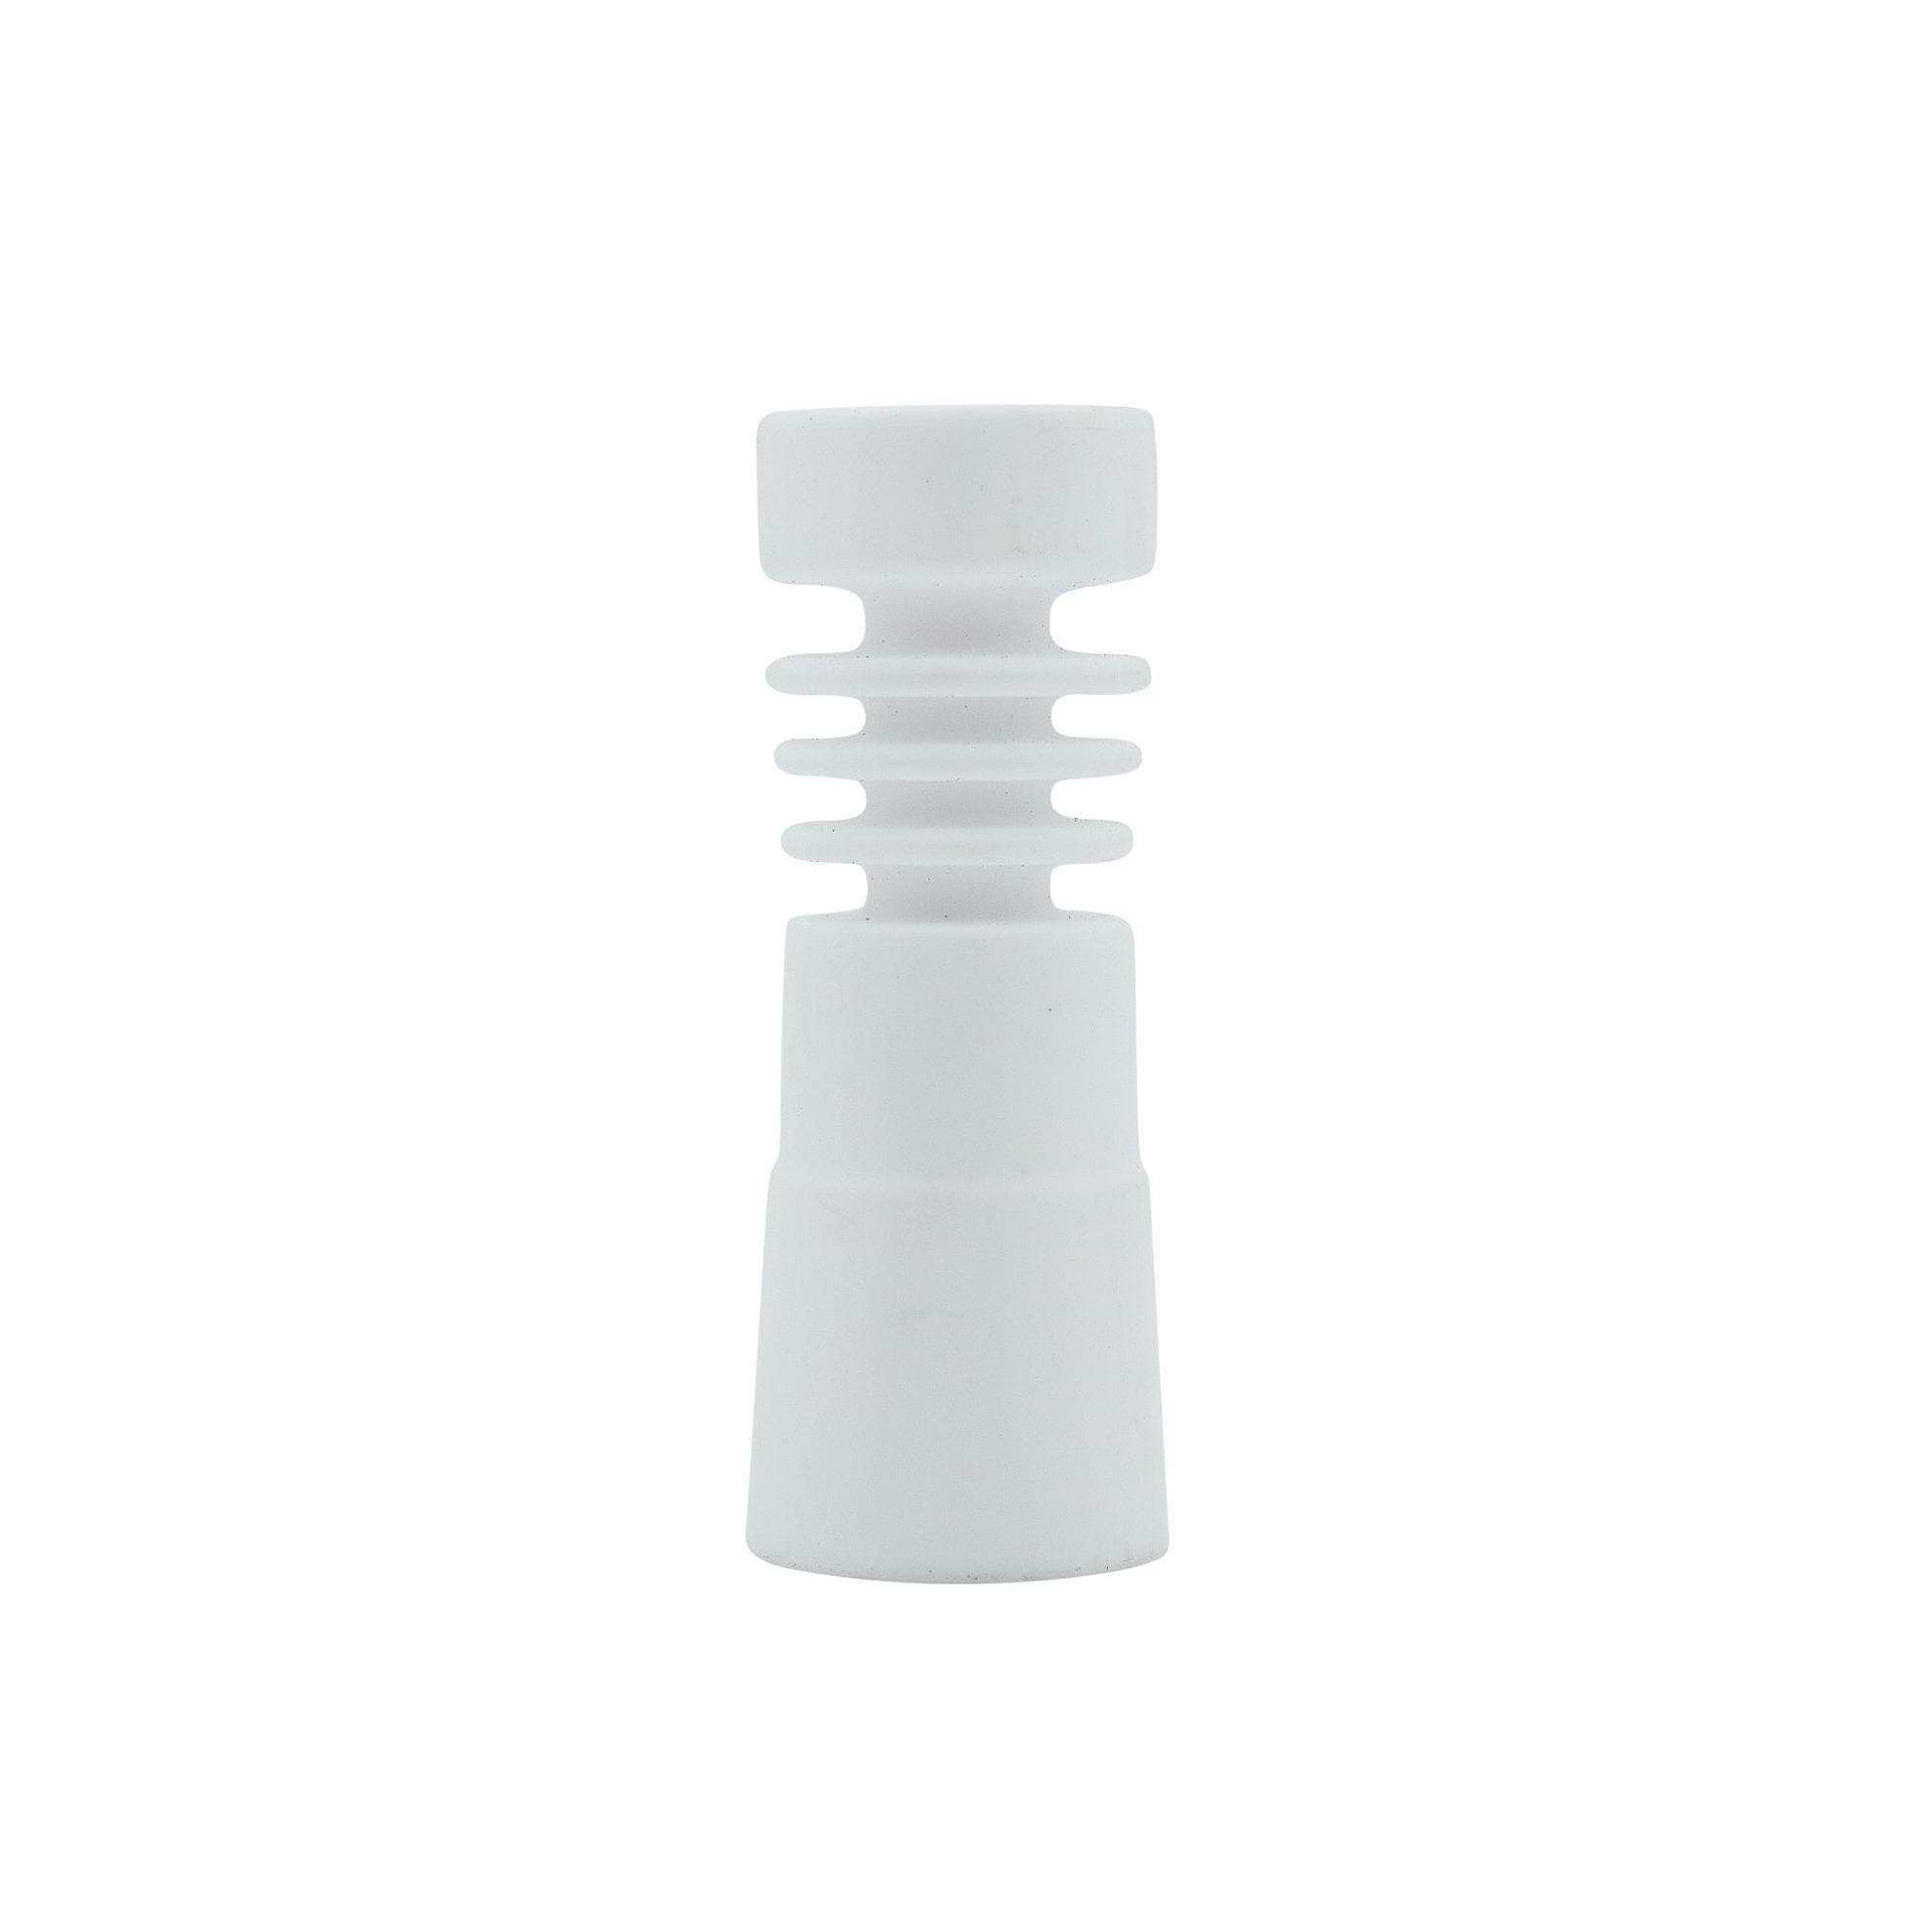 Ceramic domeless nail smoking device part fits 14mm/18mm female joints clean look